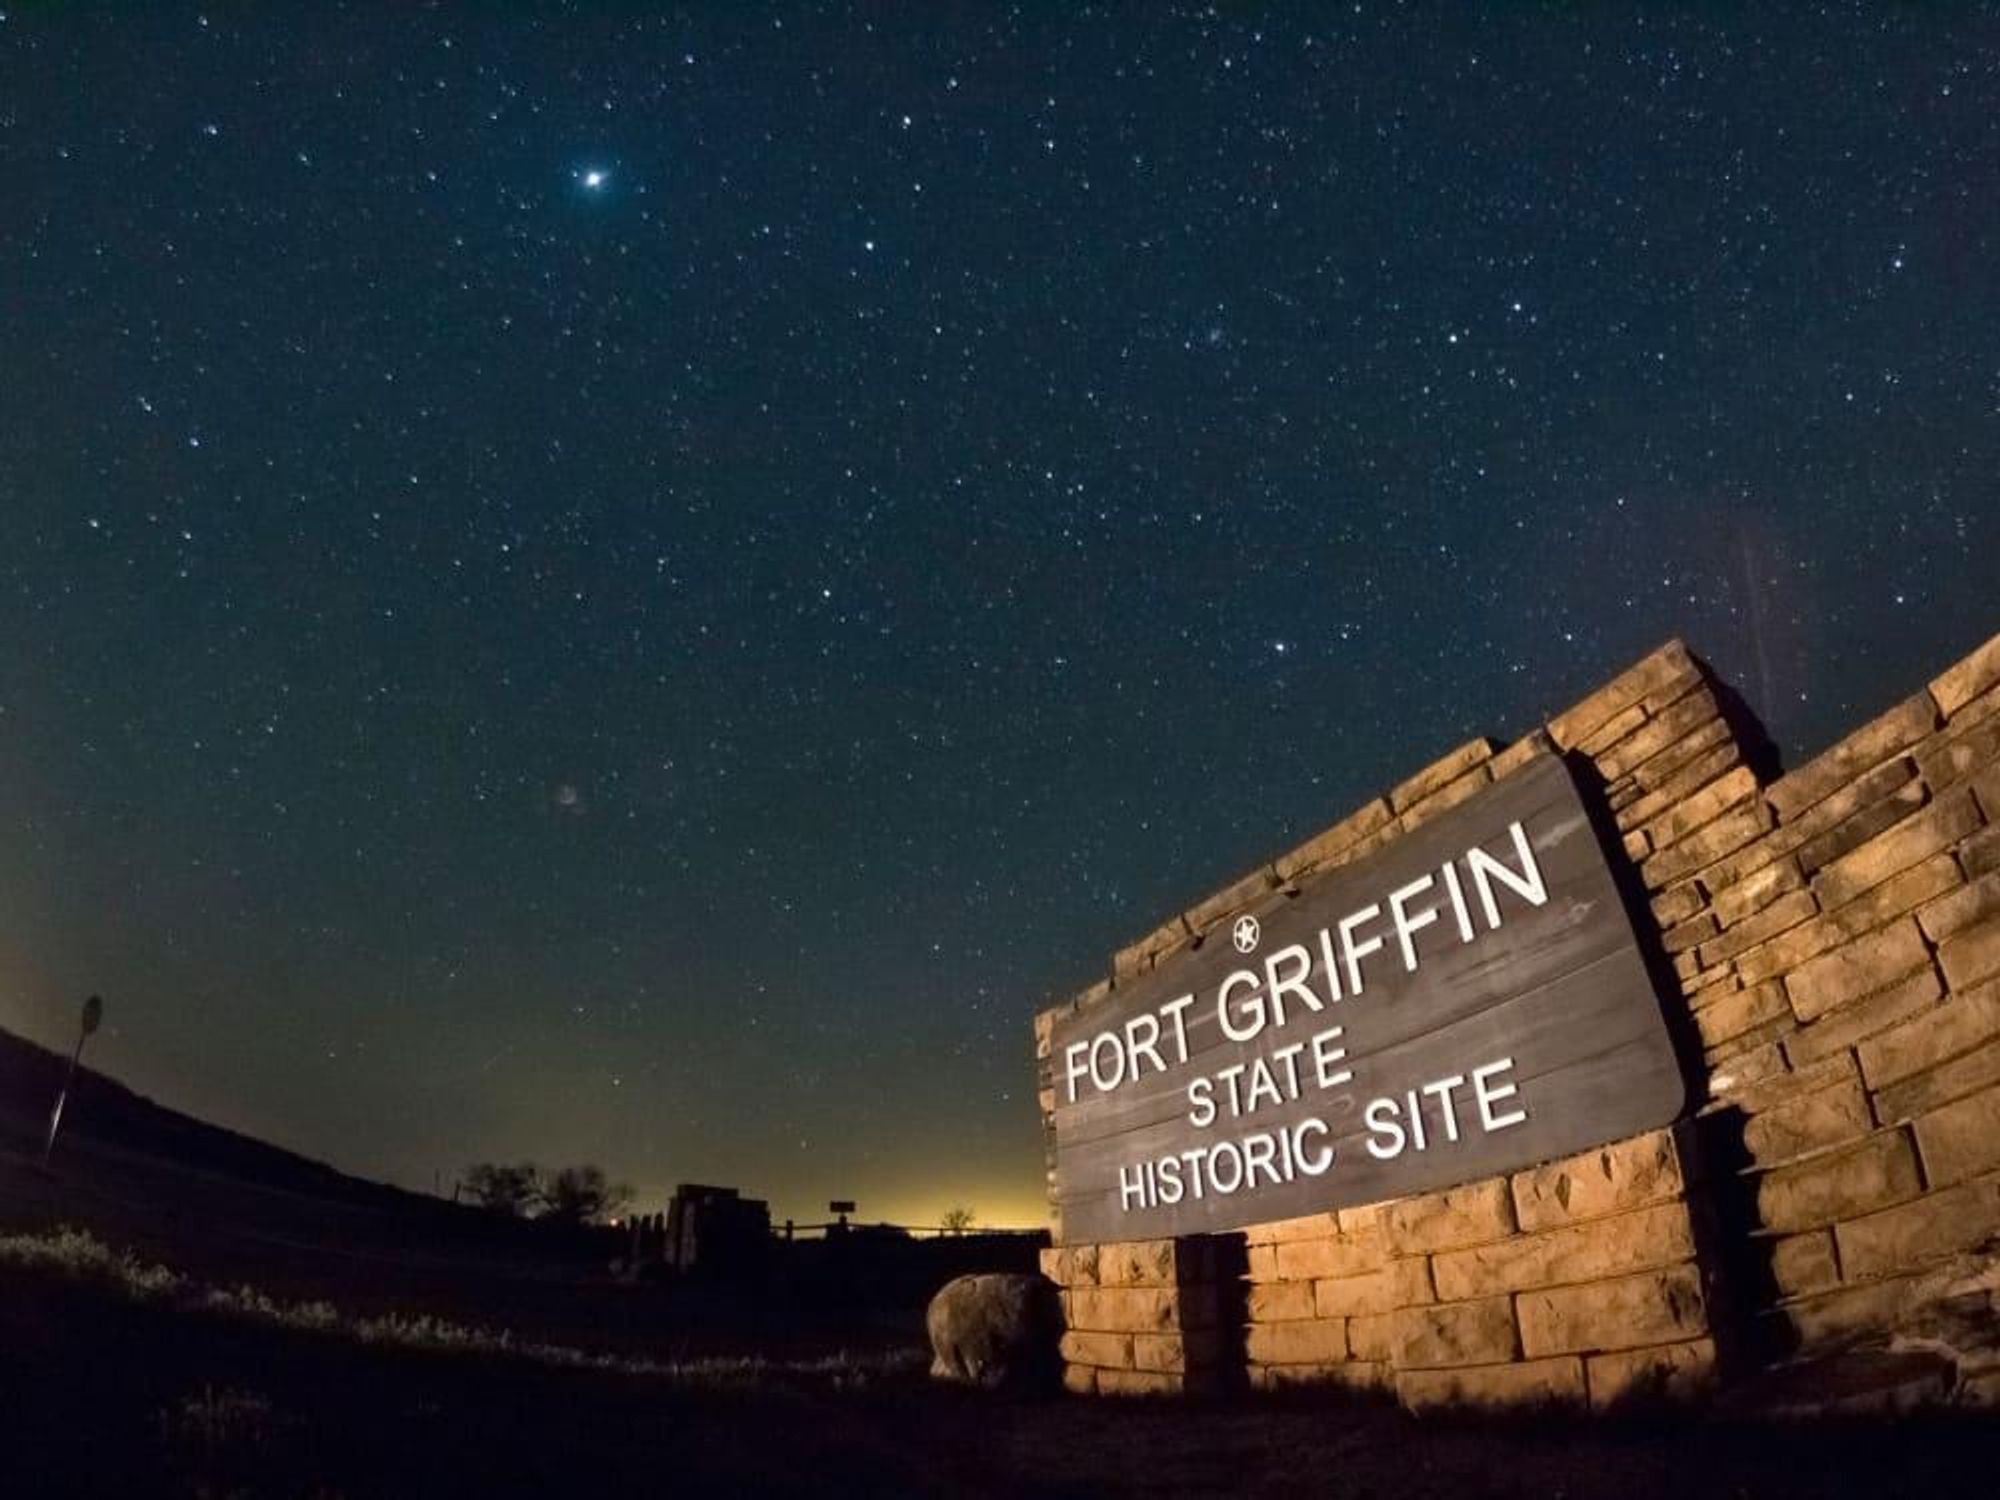 Fort Griffin Historic Site